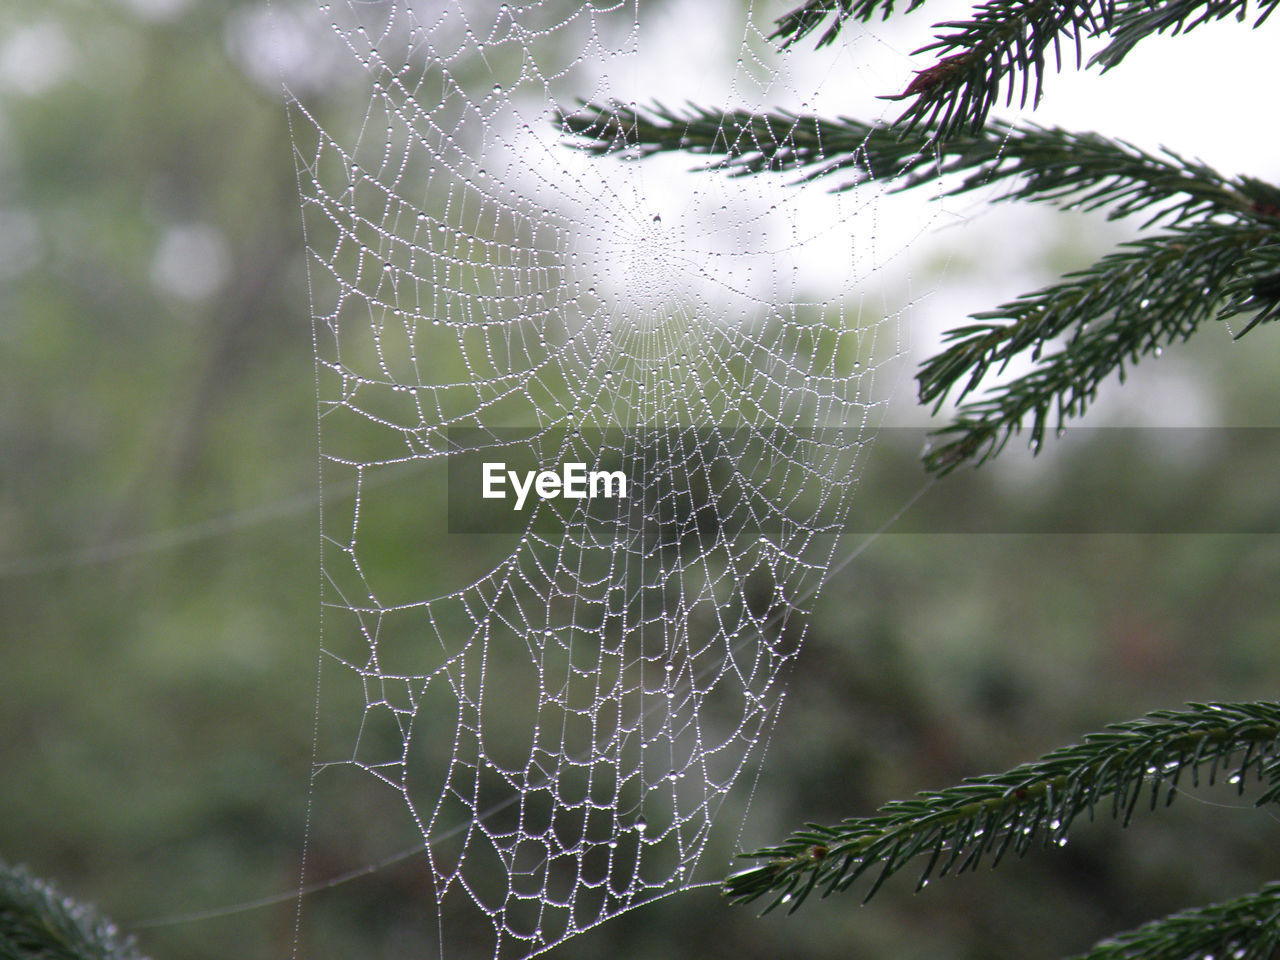 spider web, fragility, close-up, wet, nature, focus on foreground, drop, spider, plant, no people, beauty in nature, water, animal, dew, animal themes, outdoors, tree, intricacy, day, rain, pattern, environment, complexity, selective focus, trapped, branch, arachnid, tranquility, leaf